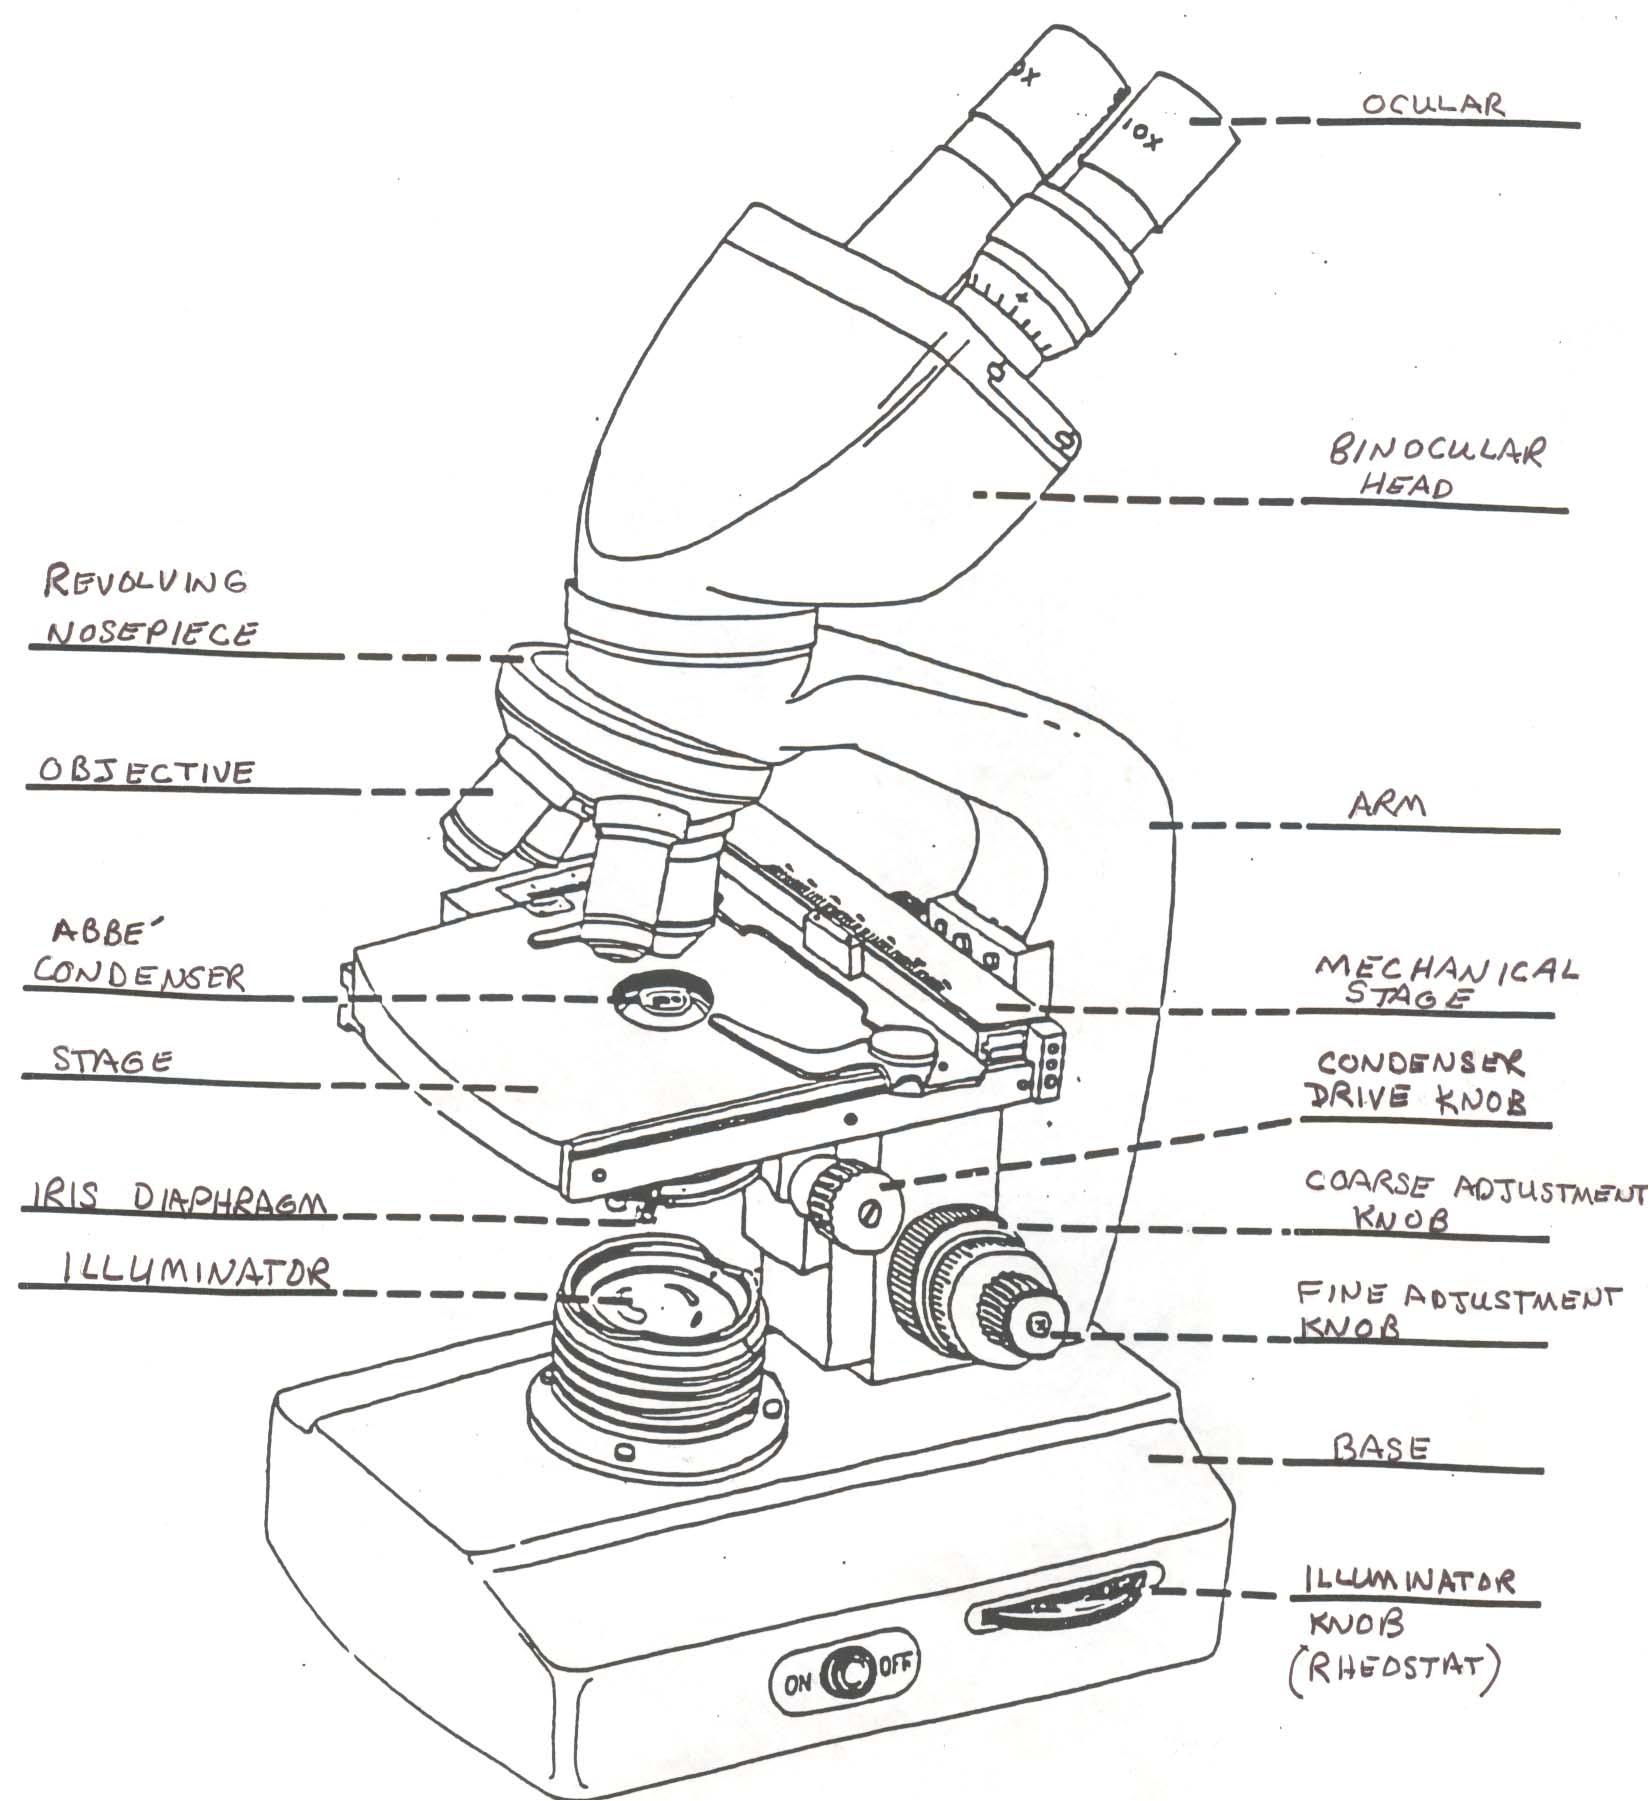 Microscope Drawing And Label at GetDrawings | Free download